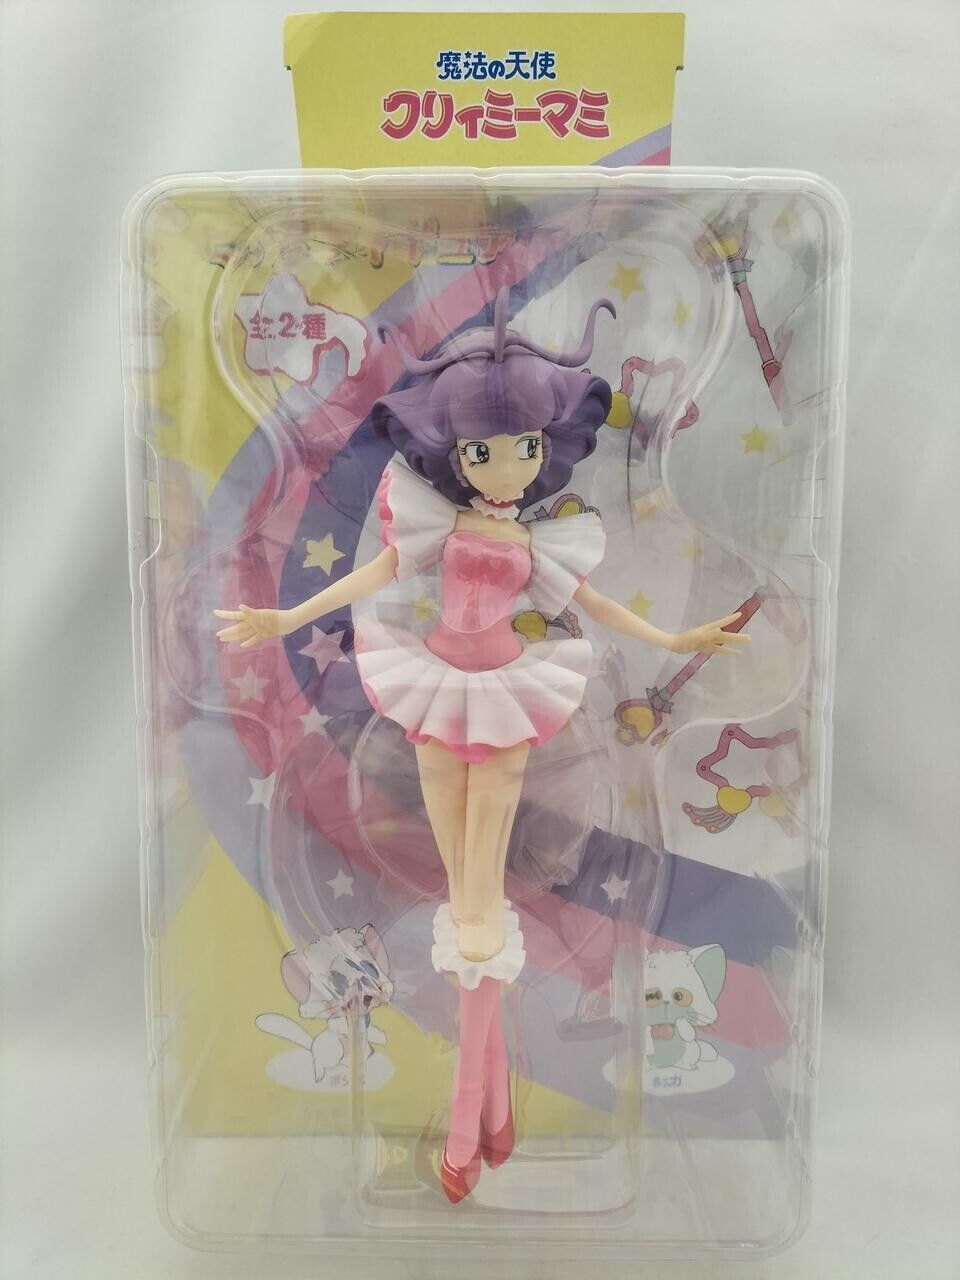 The Magical Angel CREAMY MAMI Big Figure Pink Dress Rare SYSTEM SERVICE Vintage